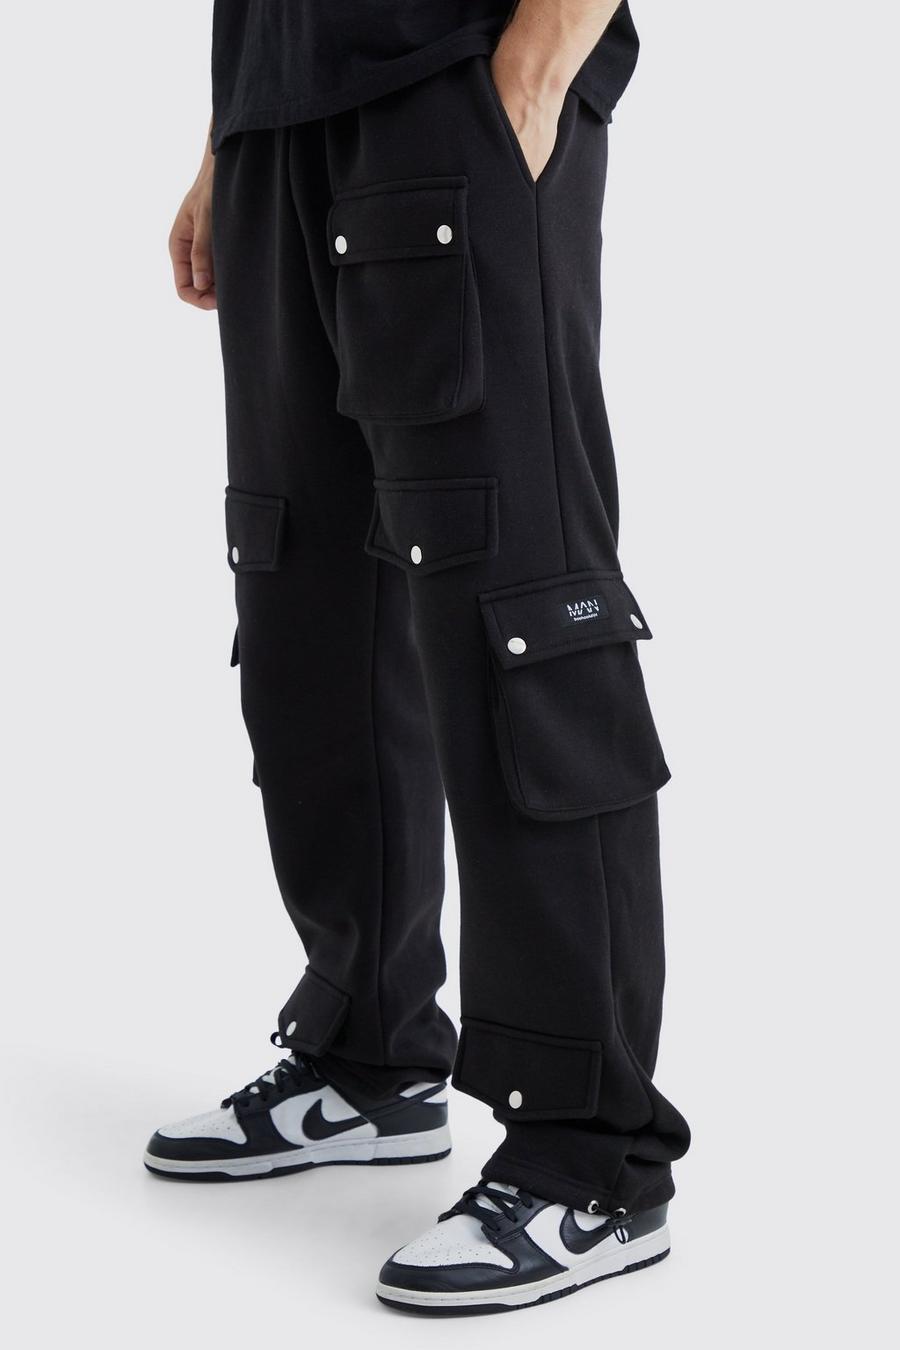 Black Tall Multi Pocket Cargo Jogger With Cuff